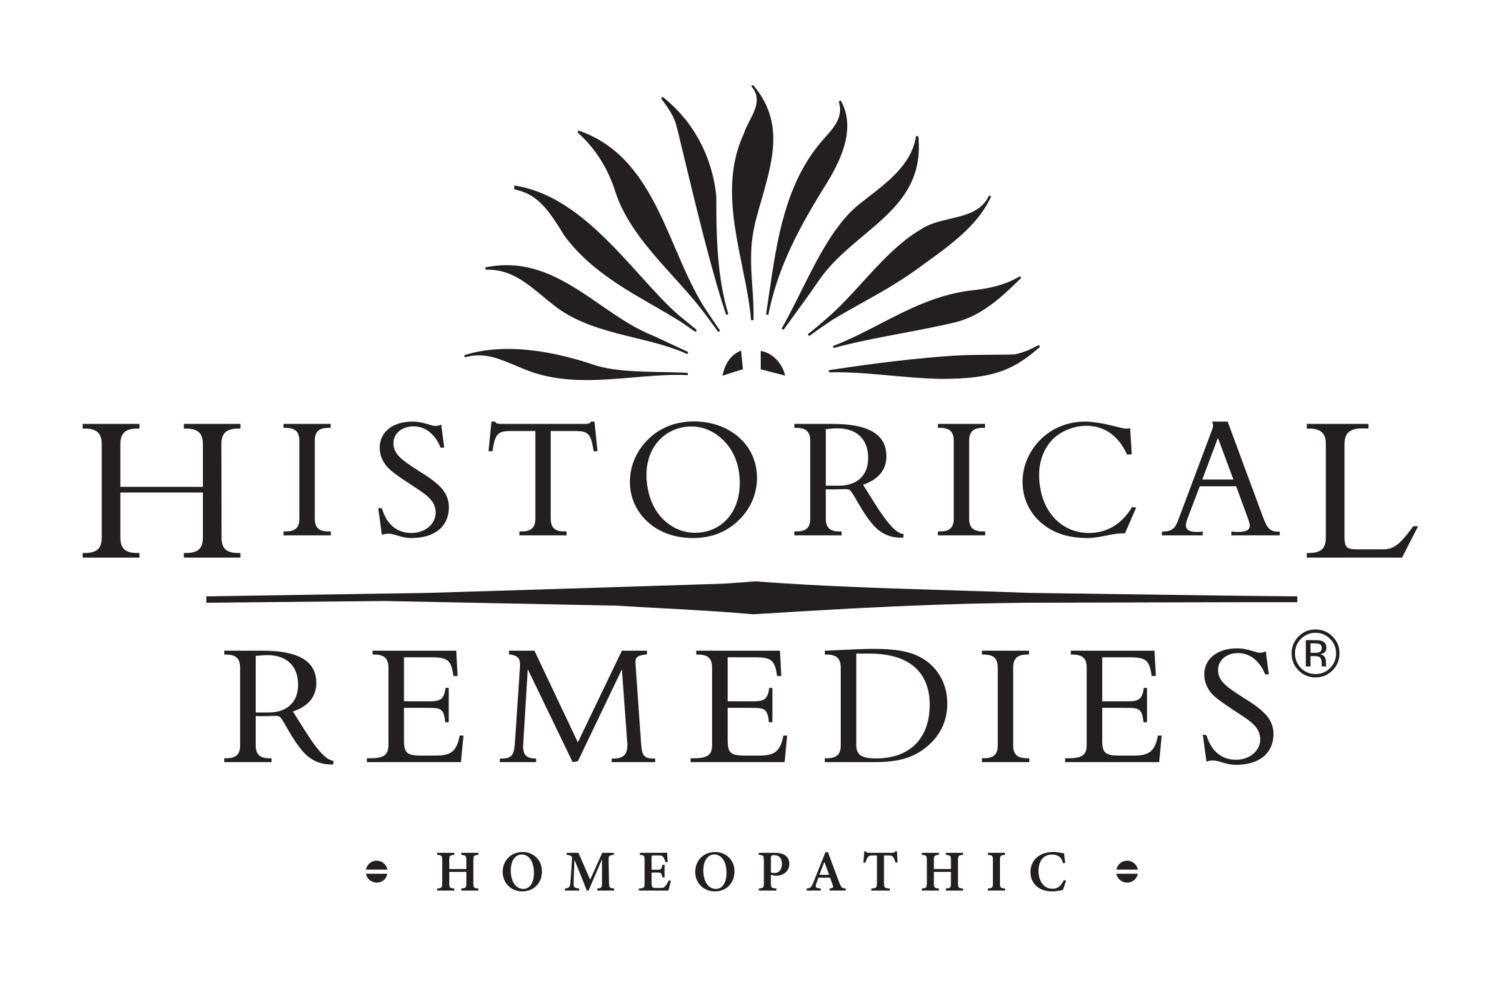 Frequently Asked Questions — Historical Remedies